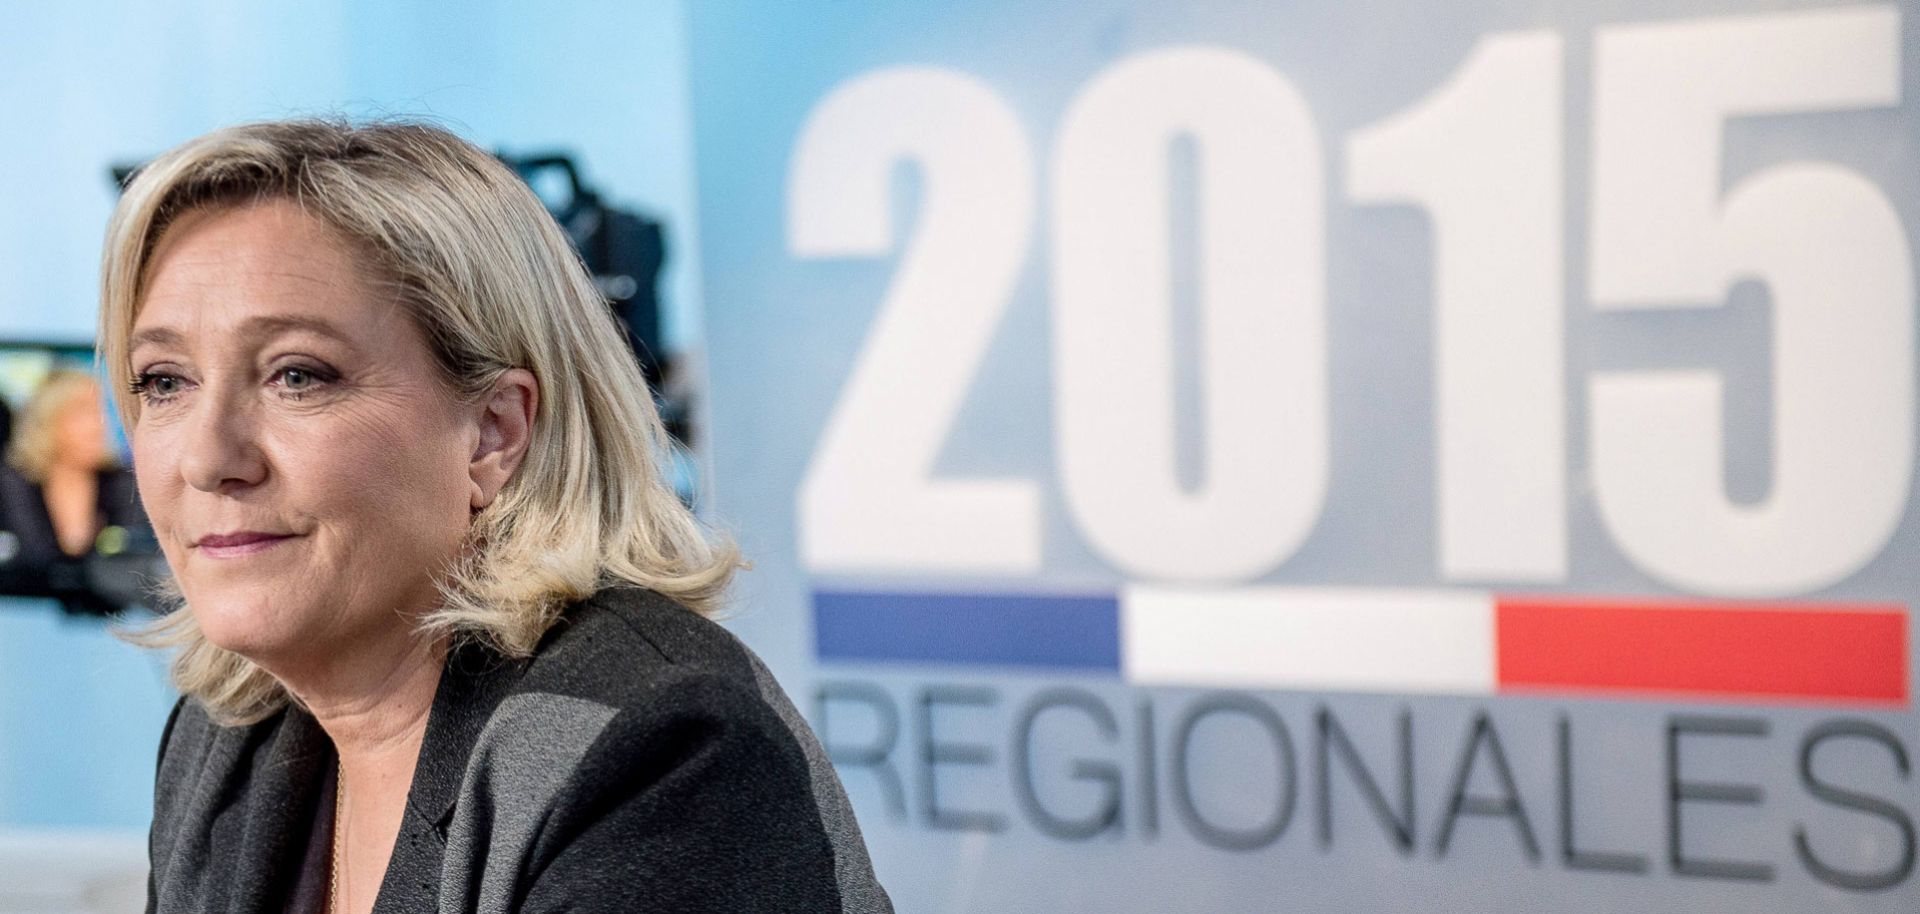 Marine Le Pen, president of France's growingly popular National Front party, on Dec. 3 awaits the beginning of a debate with other candidates running in regional elections for Nord-Pas-de-Calais-Picardie.